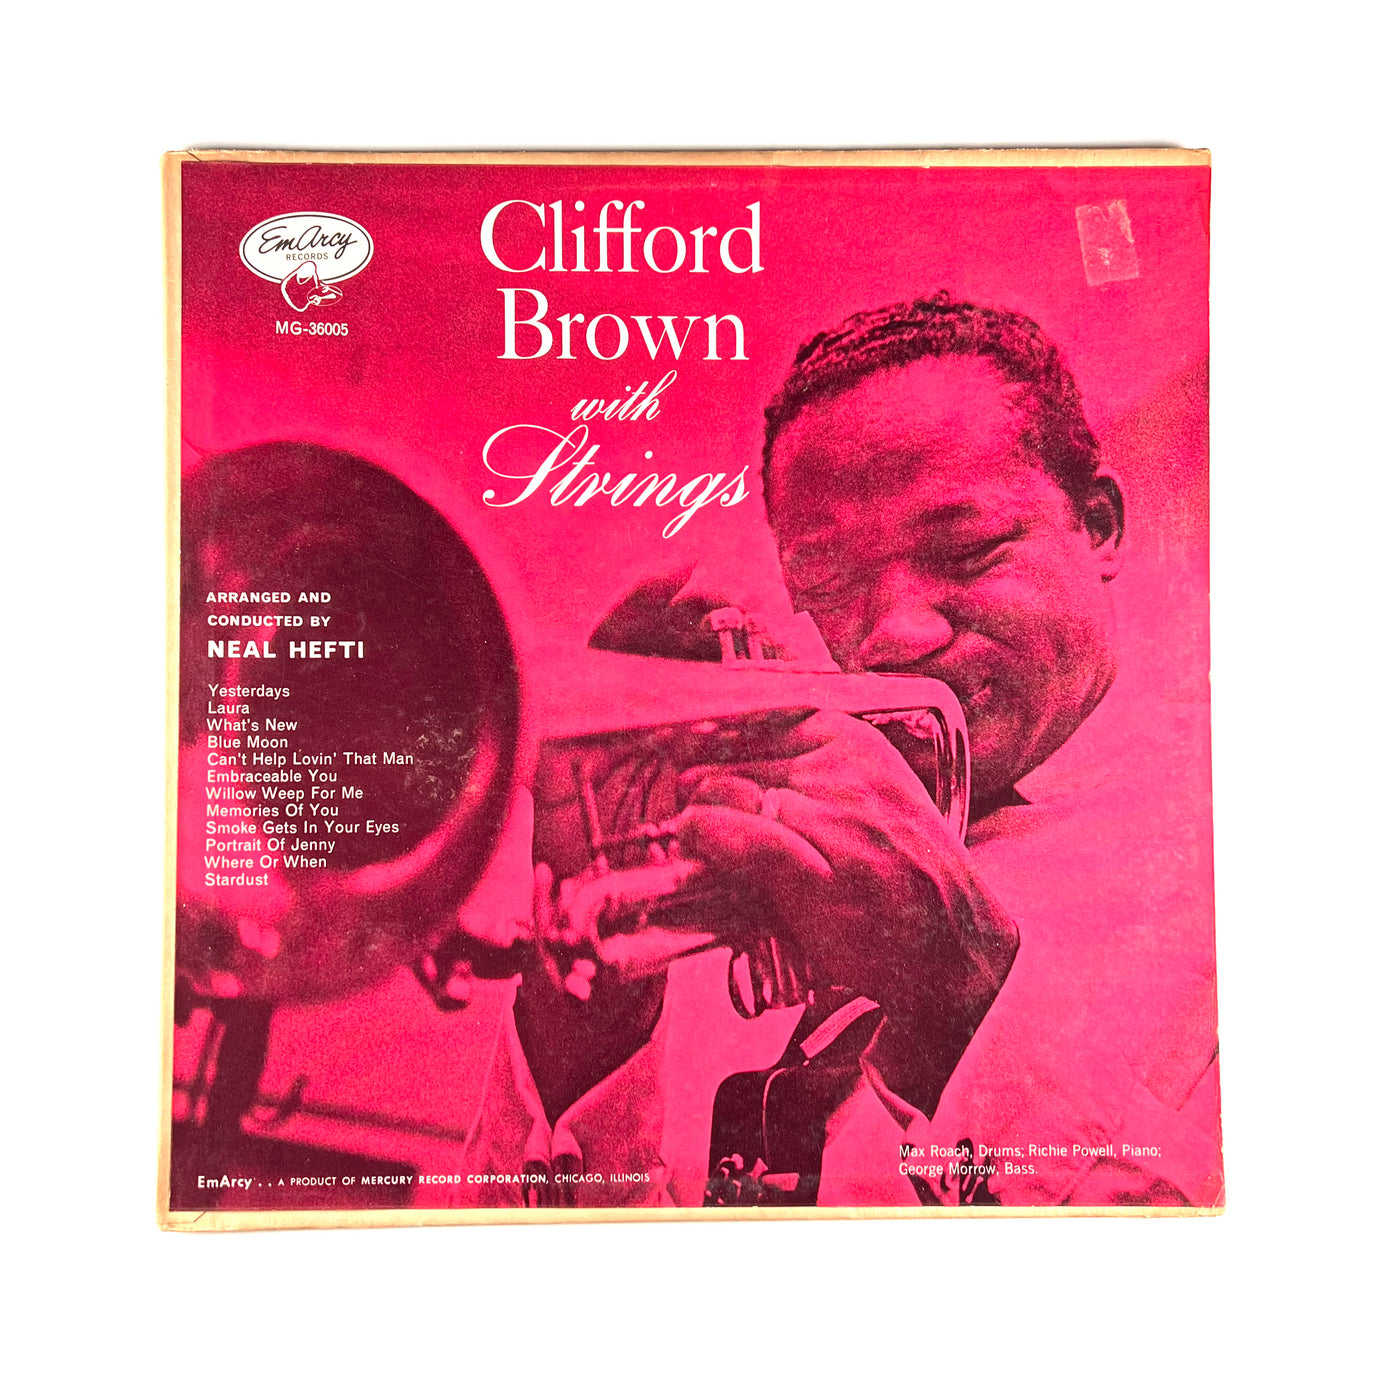 Clifford Brown - Clifford Brown With Strings - 1958 Mono Reissue